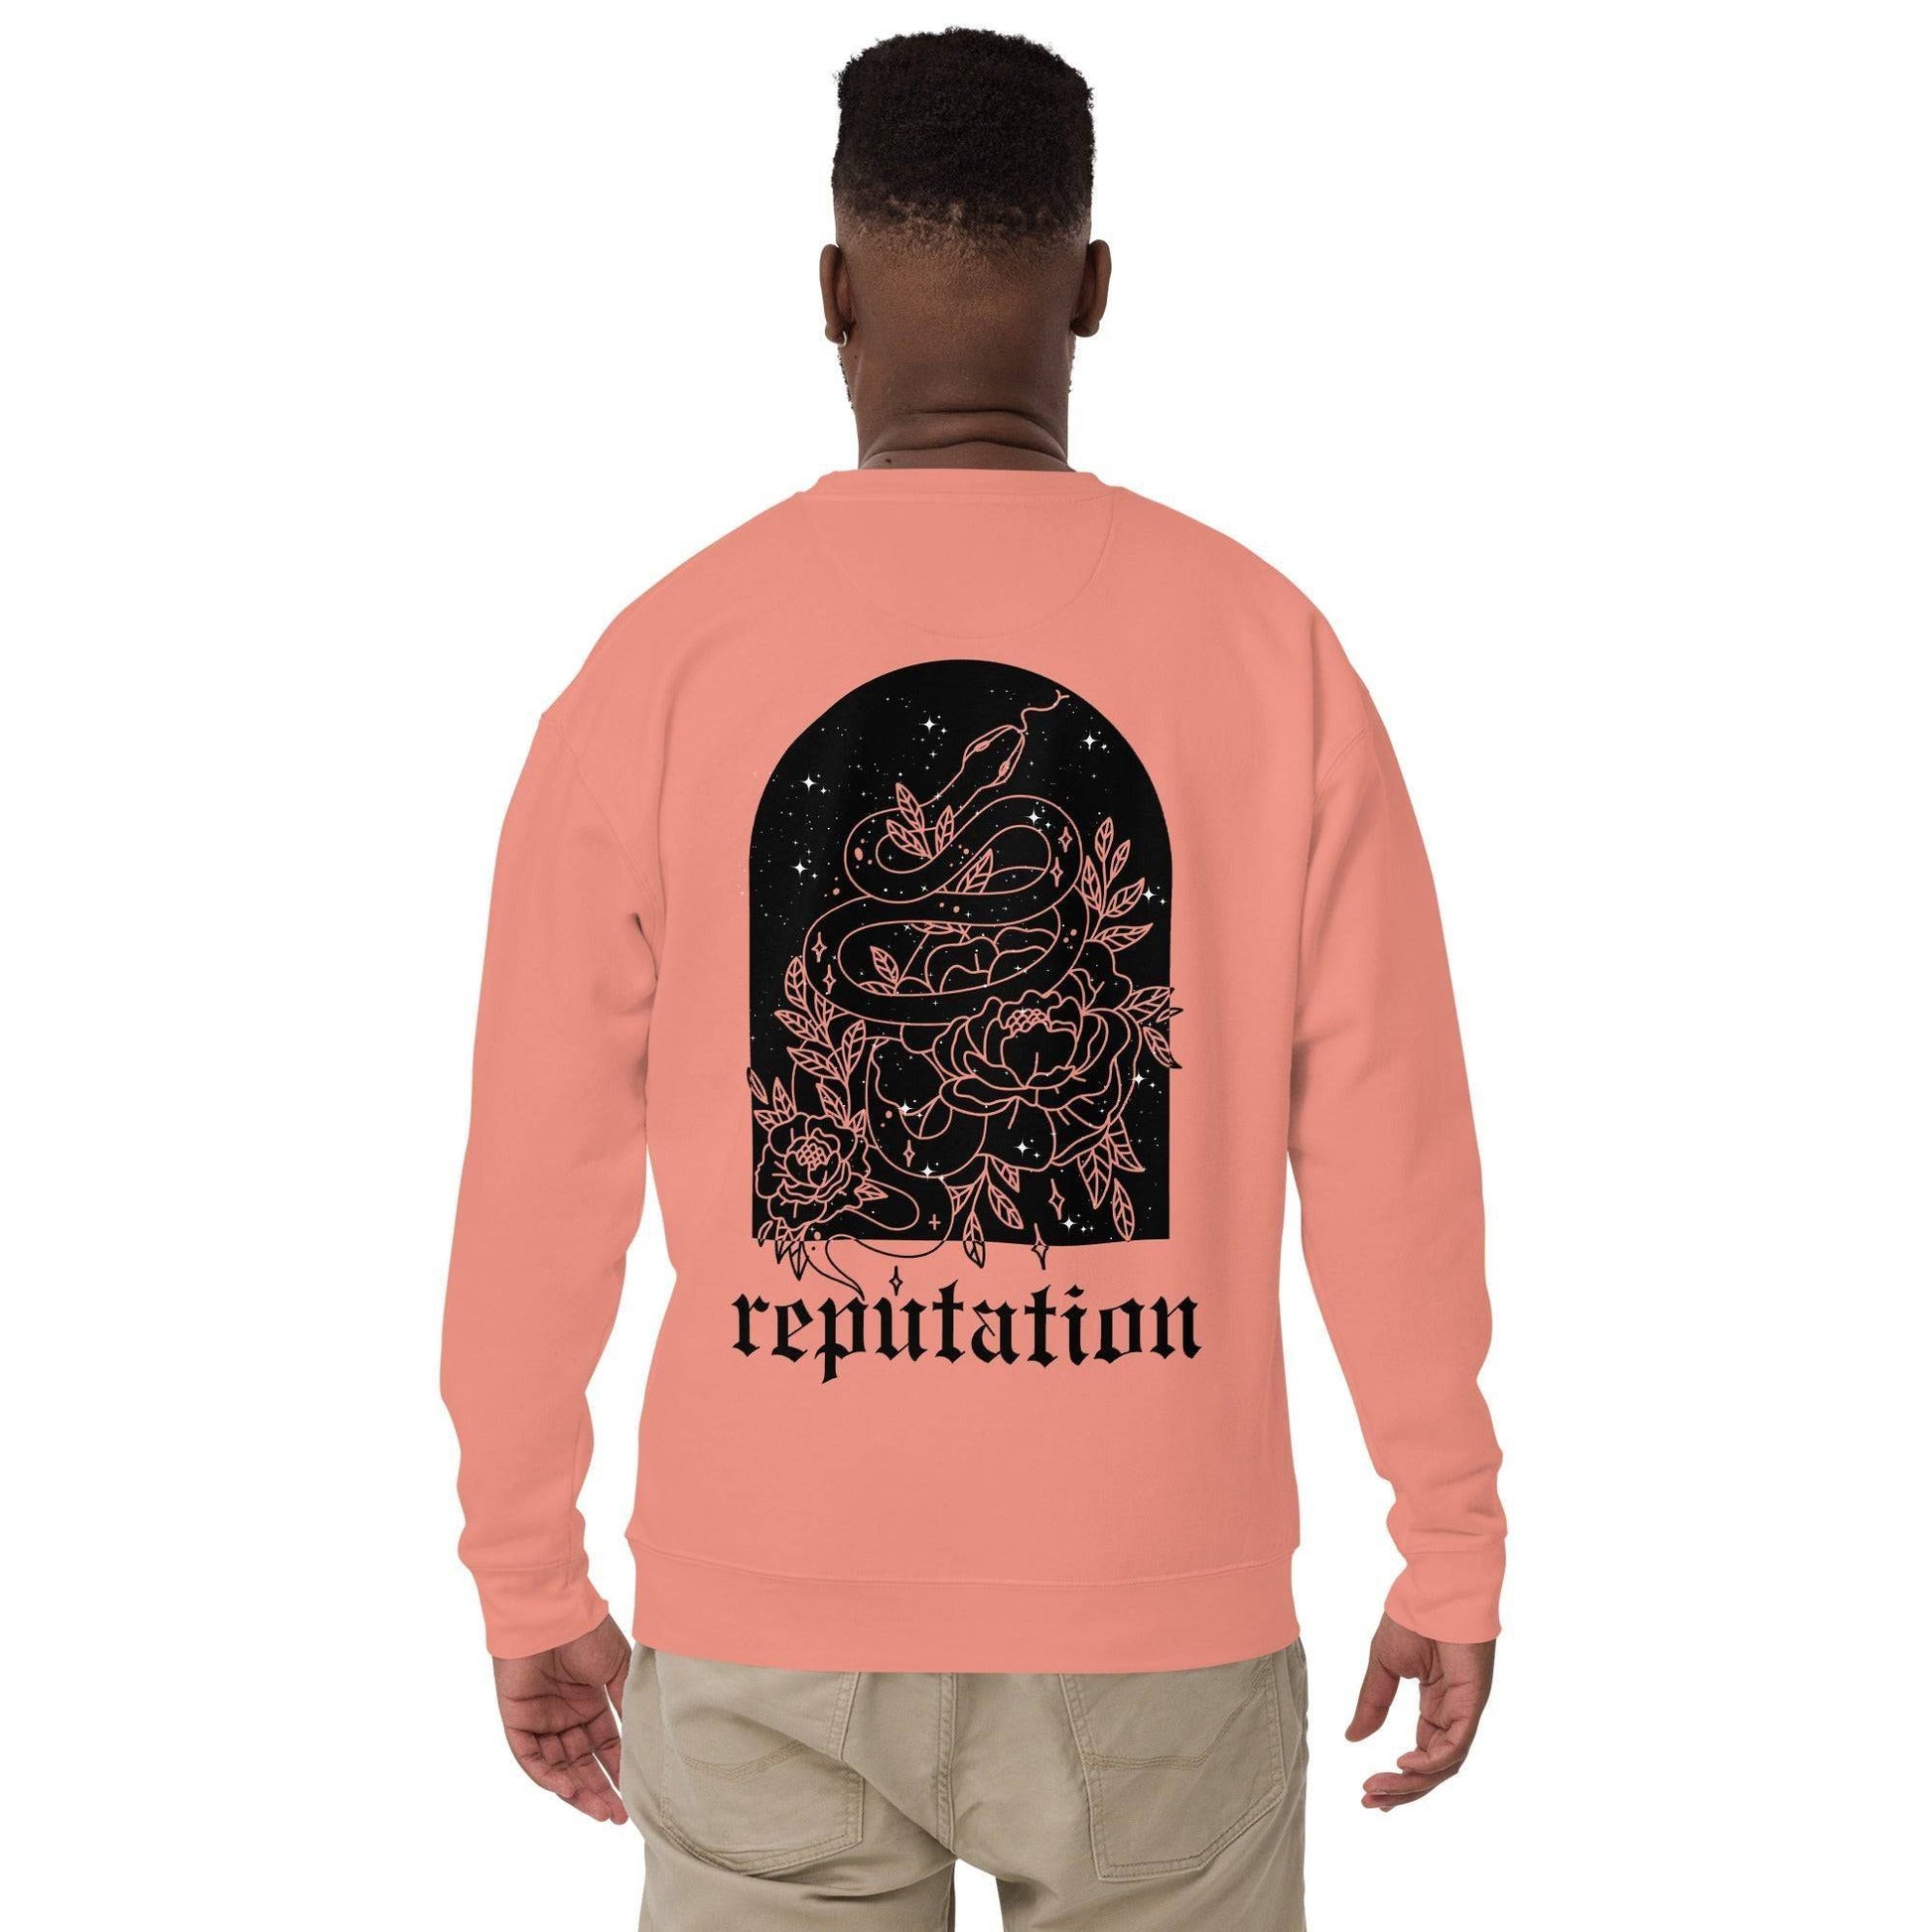 Taylor Swift End Game Embroidered Sweatshirt Dusty Rose